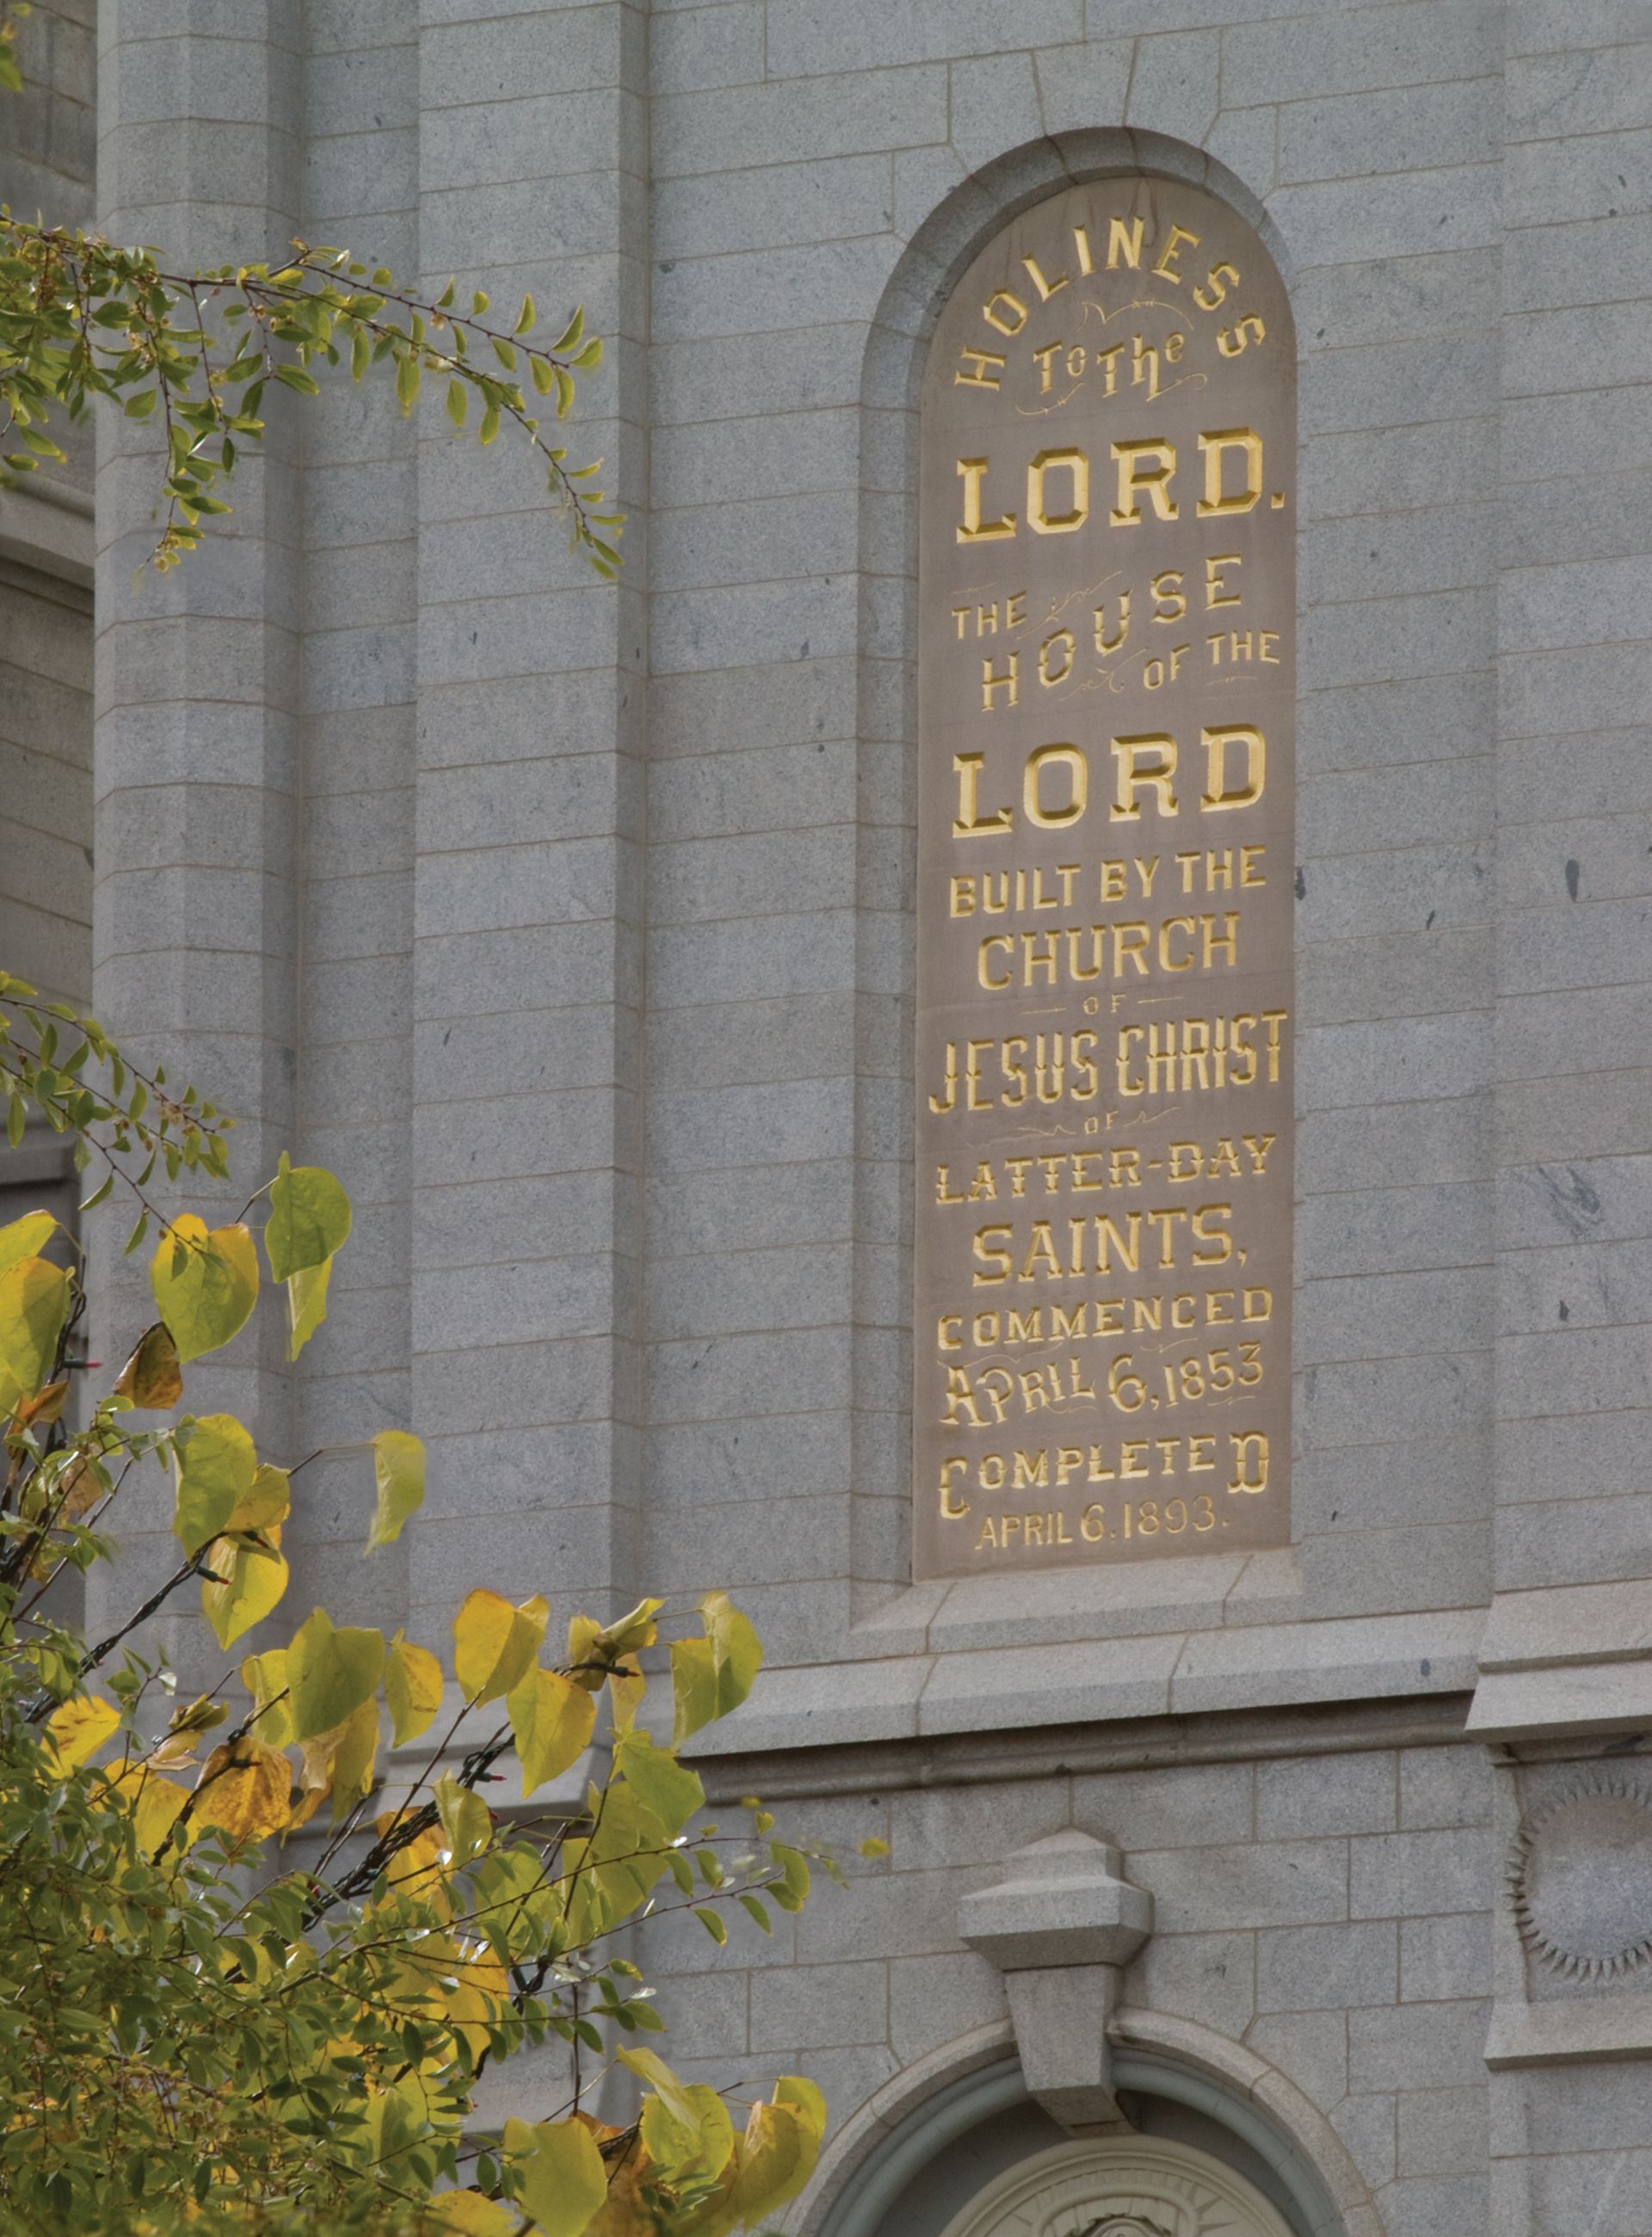 The Salt Lake Temple inscription, “Holiness to the Lord: The House of the Lord.”